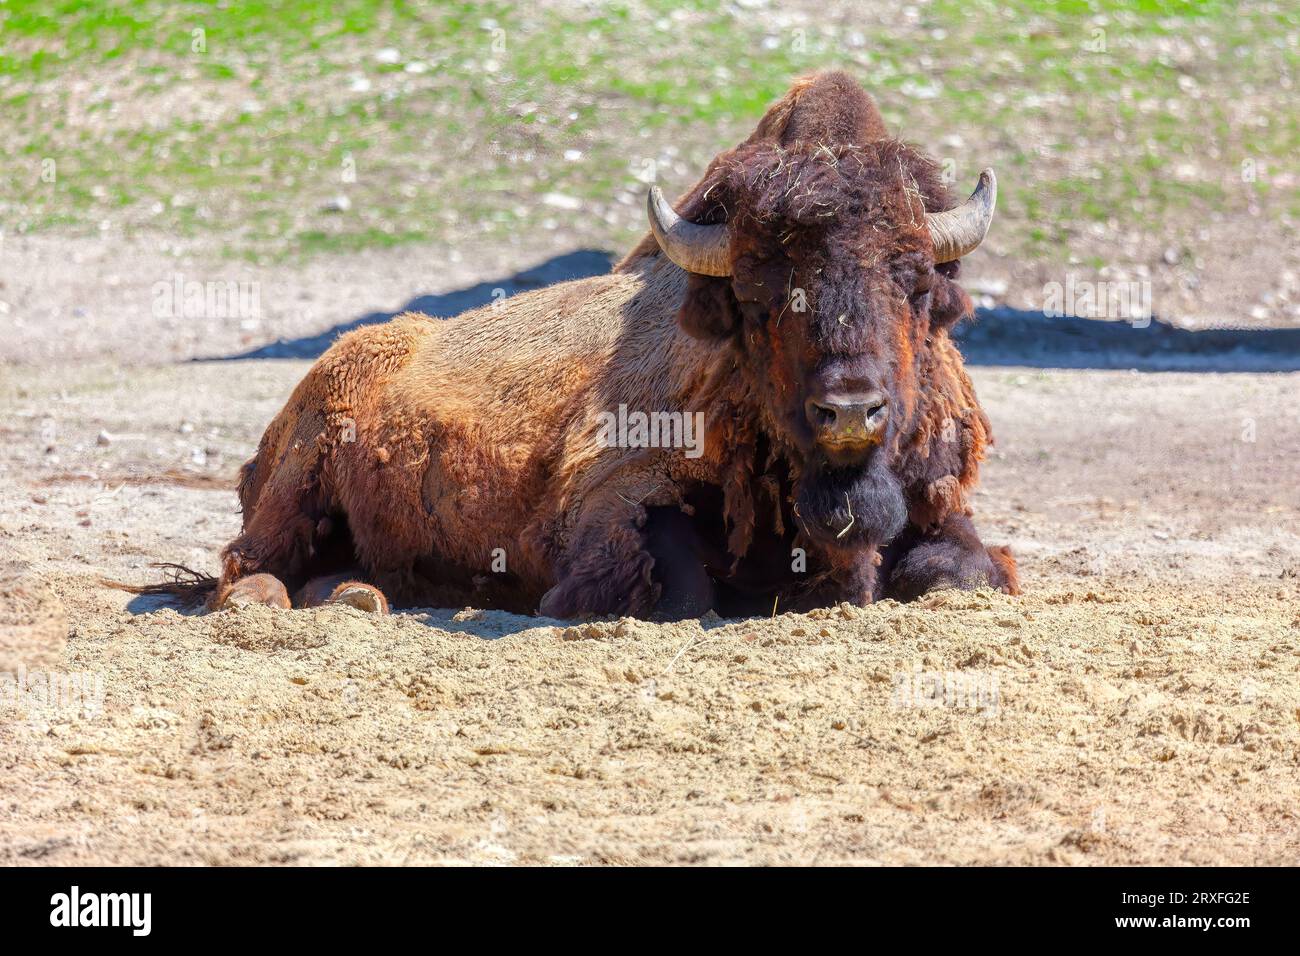 Pile of horns at the National Bison Range Stock Photo - Alamy